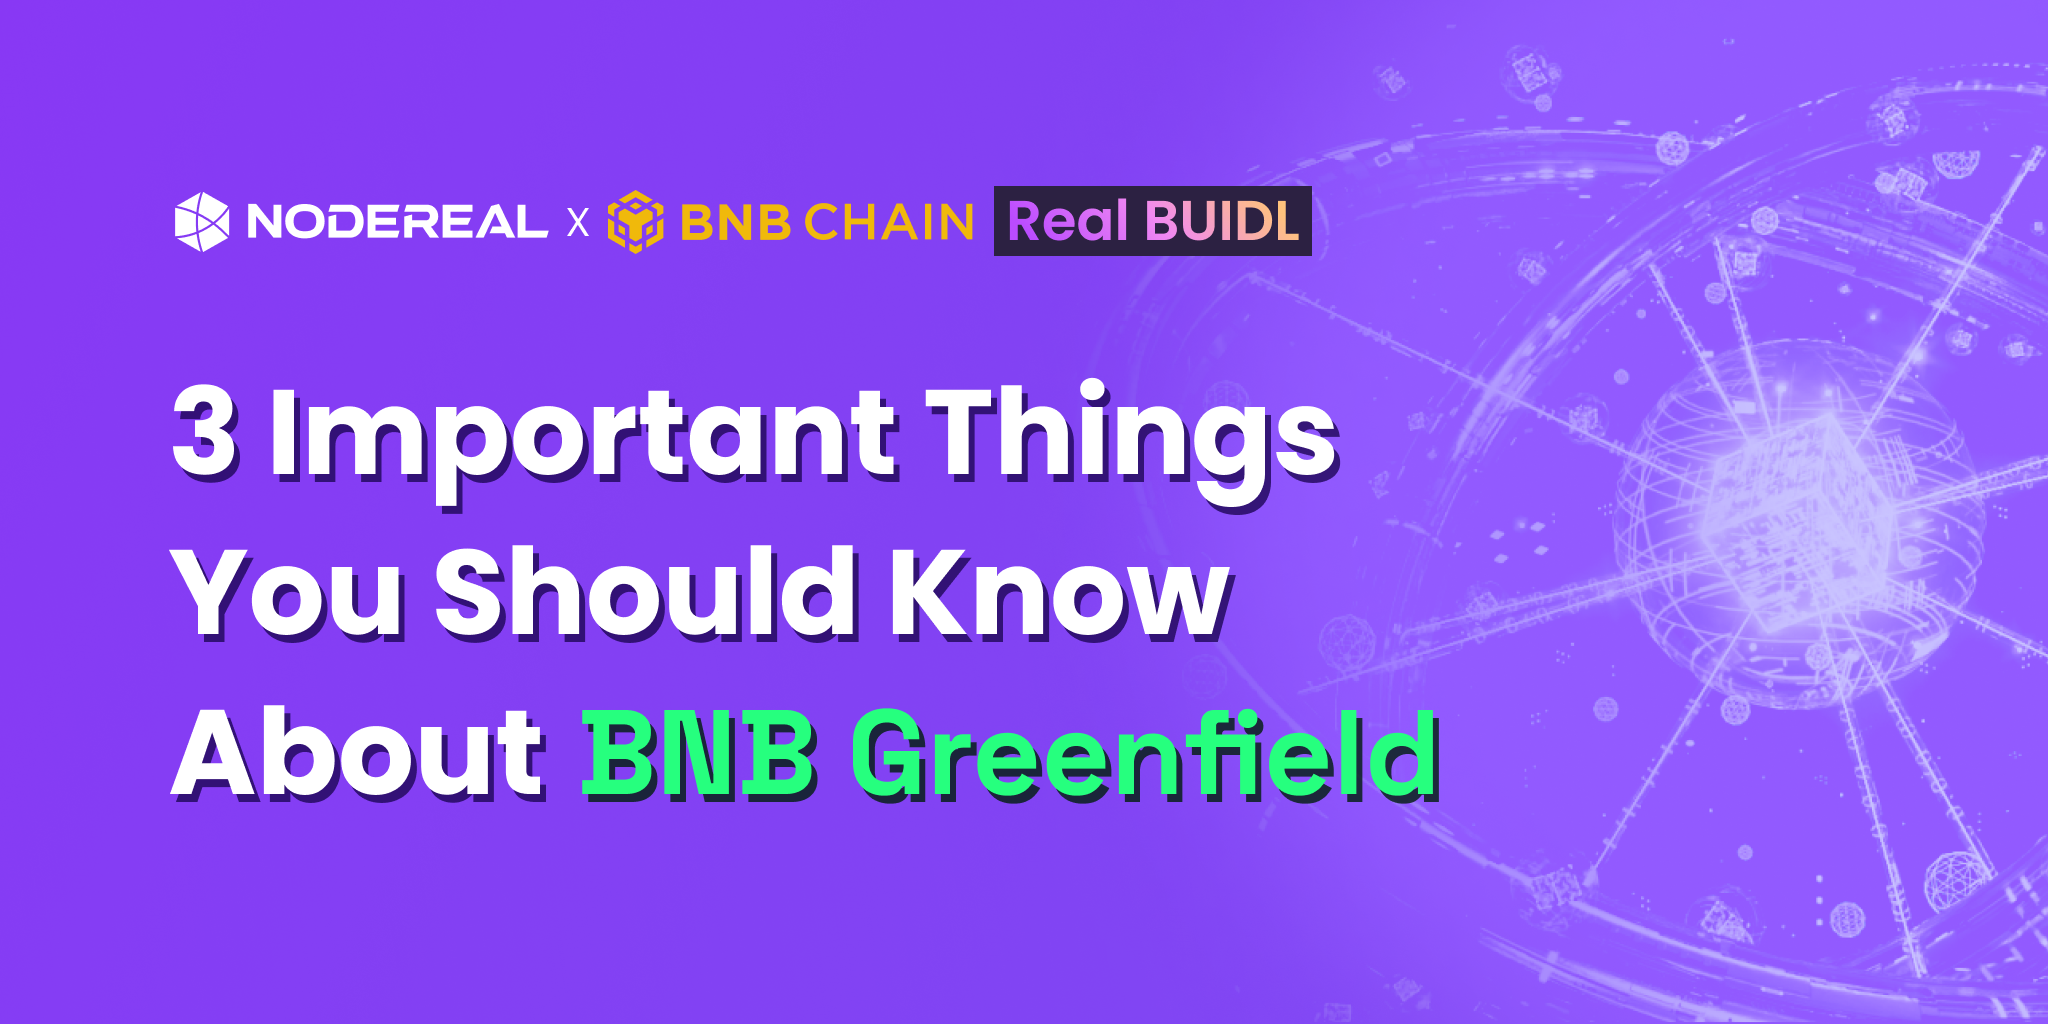 3 Important Things You Should Know About BNB Greenfield